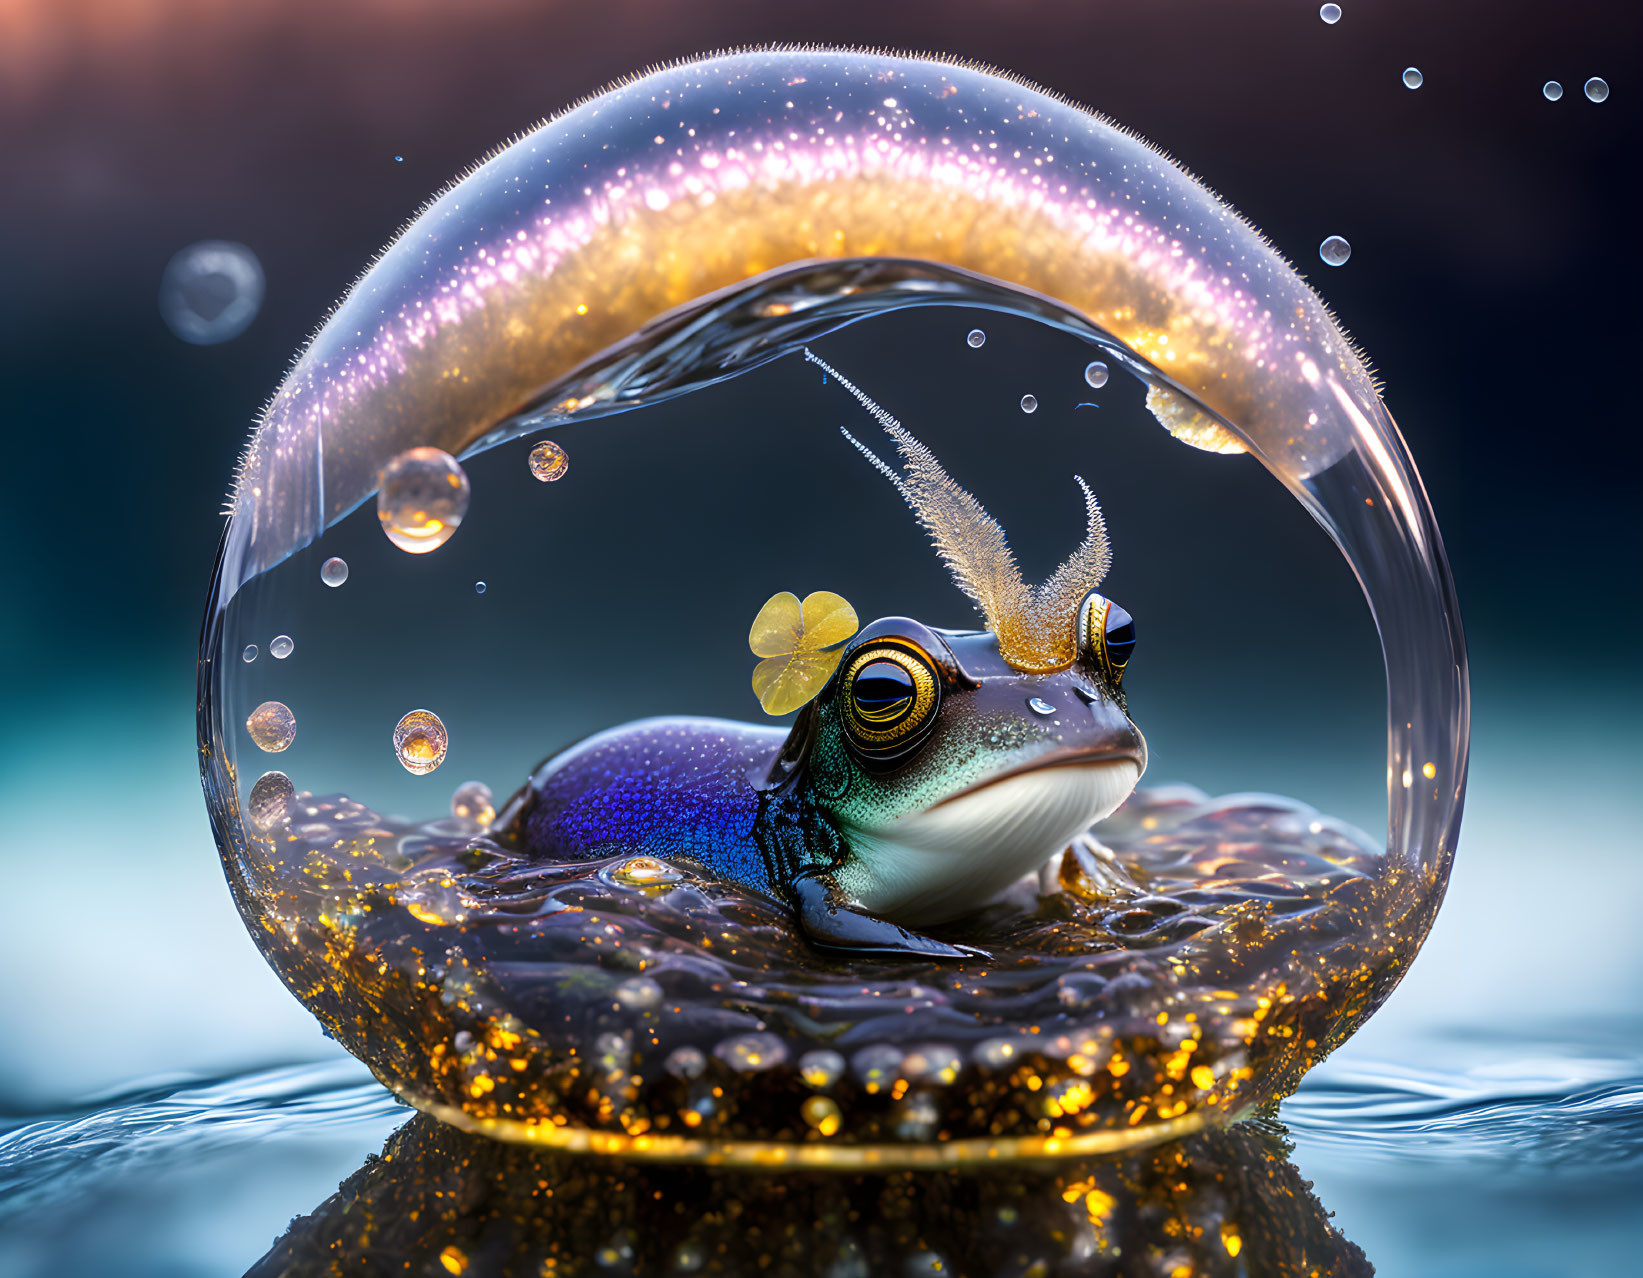 Colorful Frog in Bubble Surrounded by Stars and Water Droplets